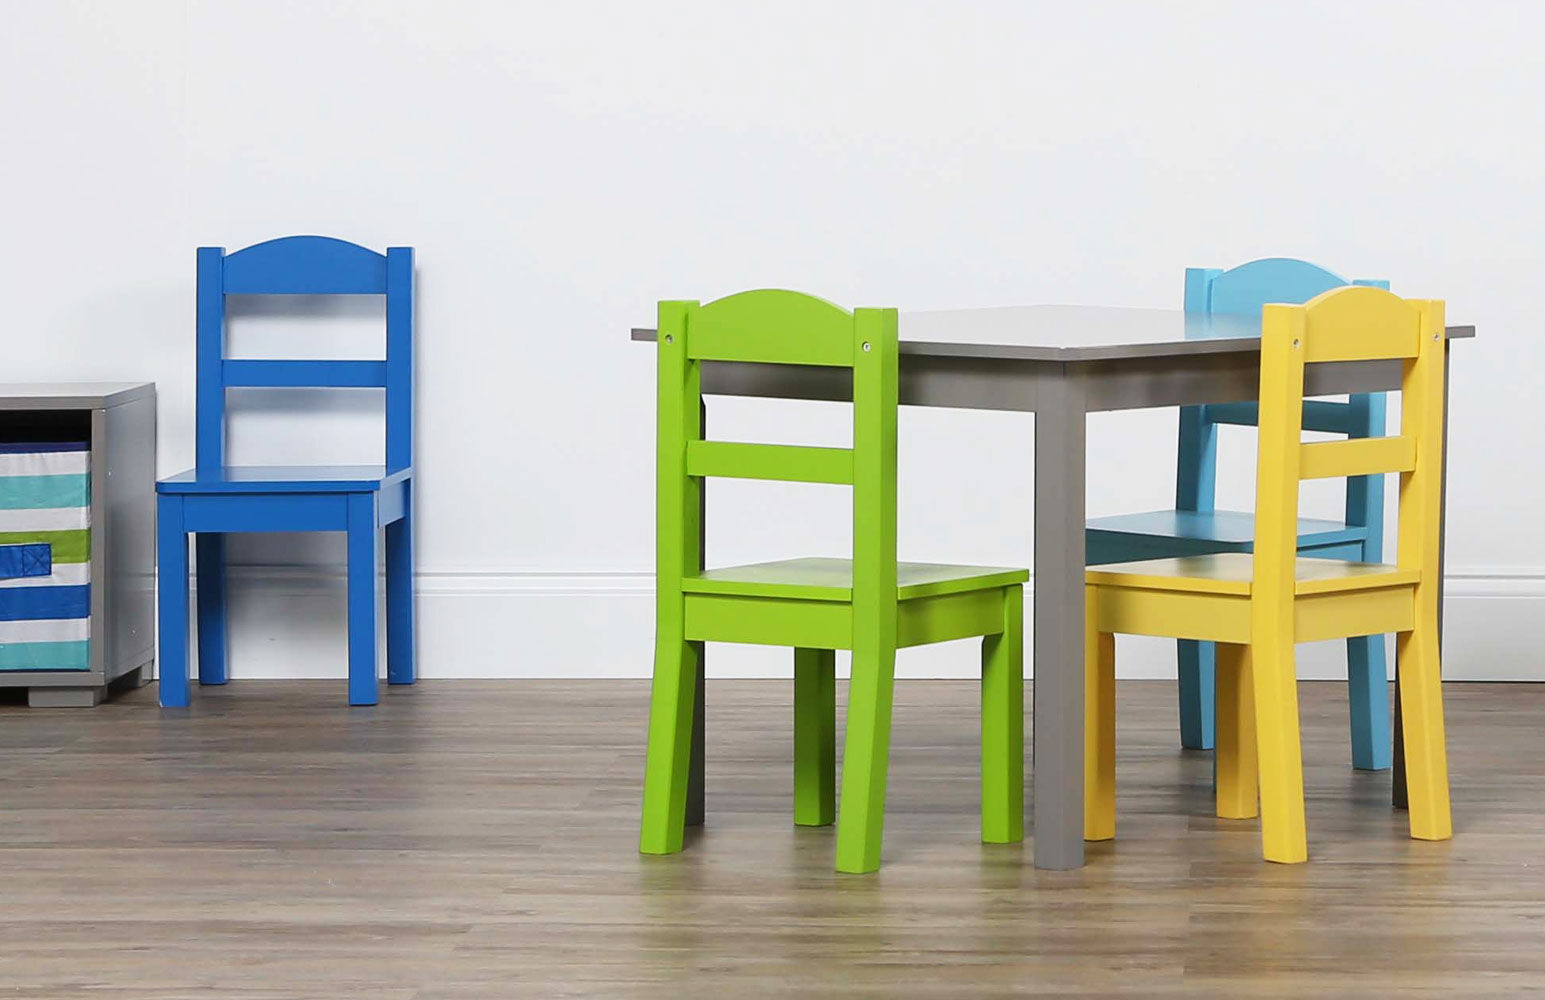 tot tutors wood table and chair set